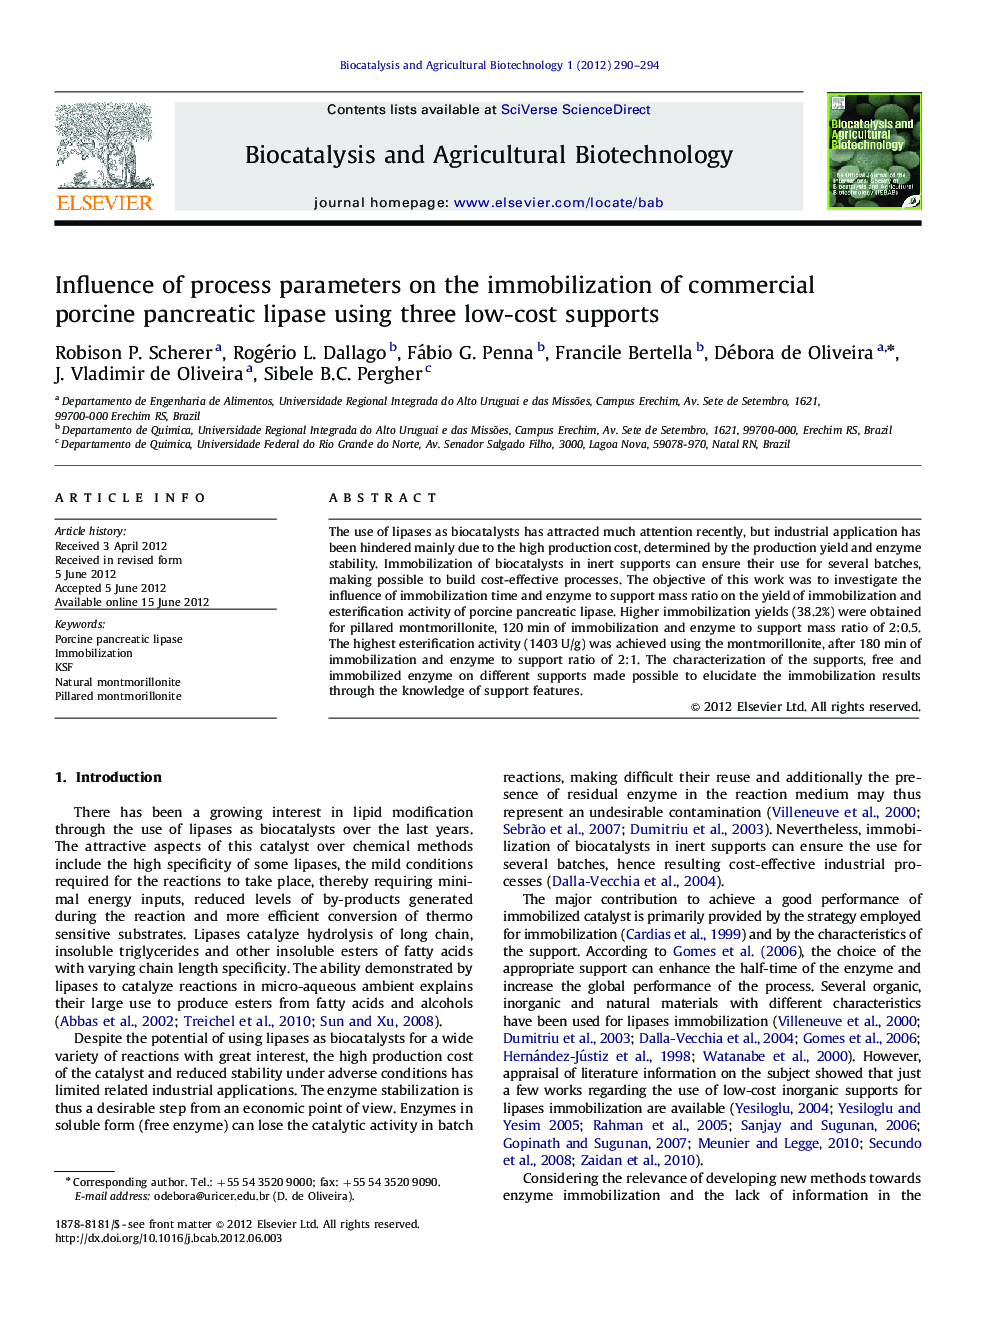 Influence of process parameters on the immobilization of commercial porcine pancreatic lipase using three low-cost supports